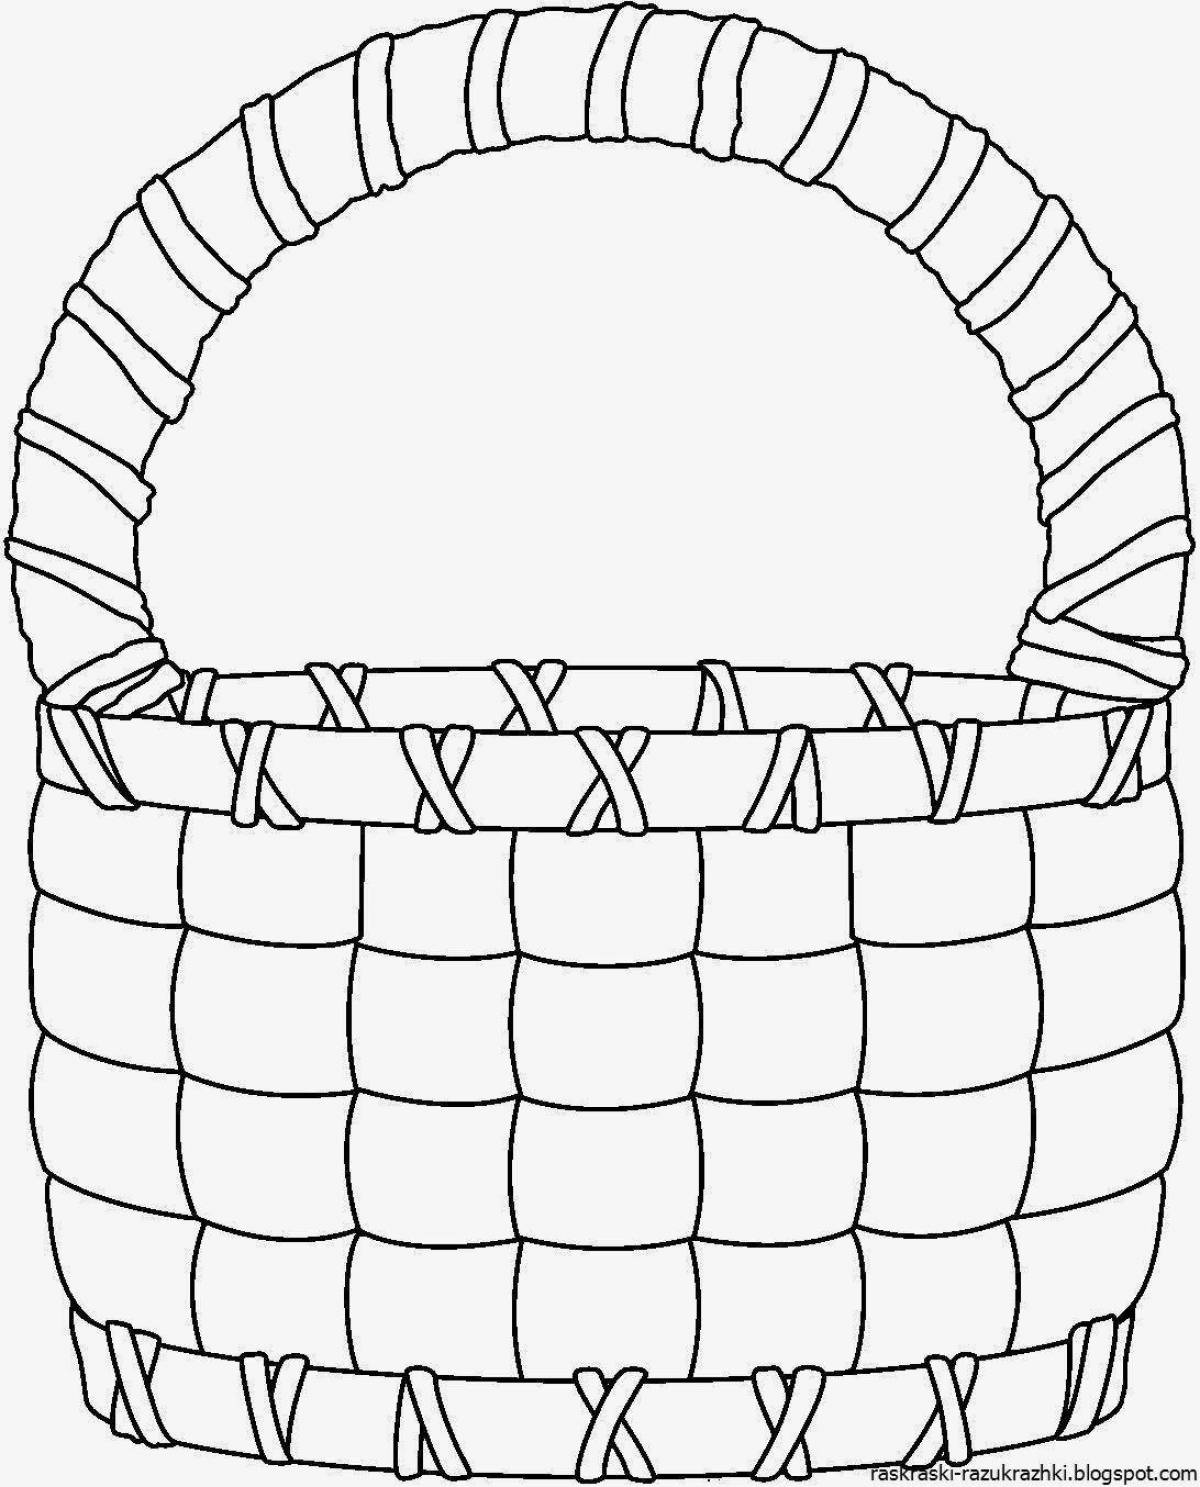 Coloring book empty basket for children